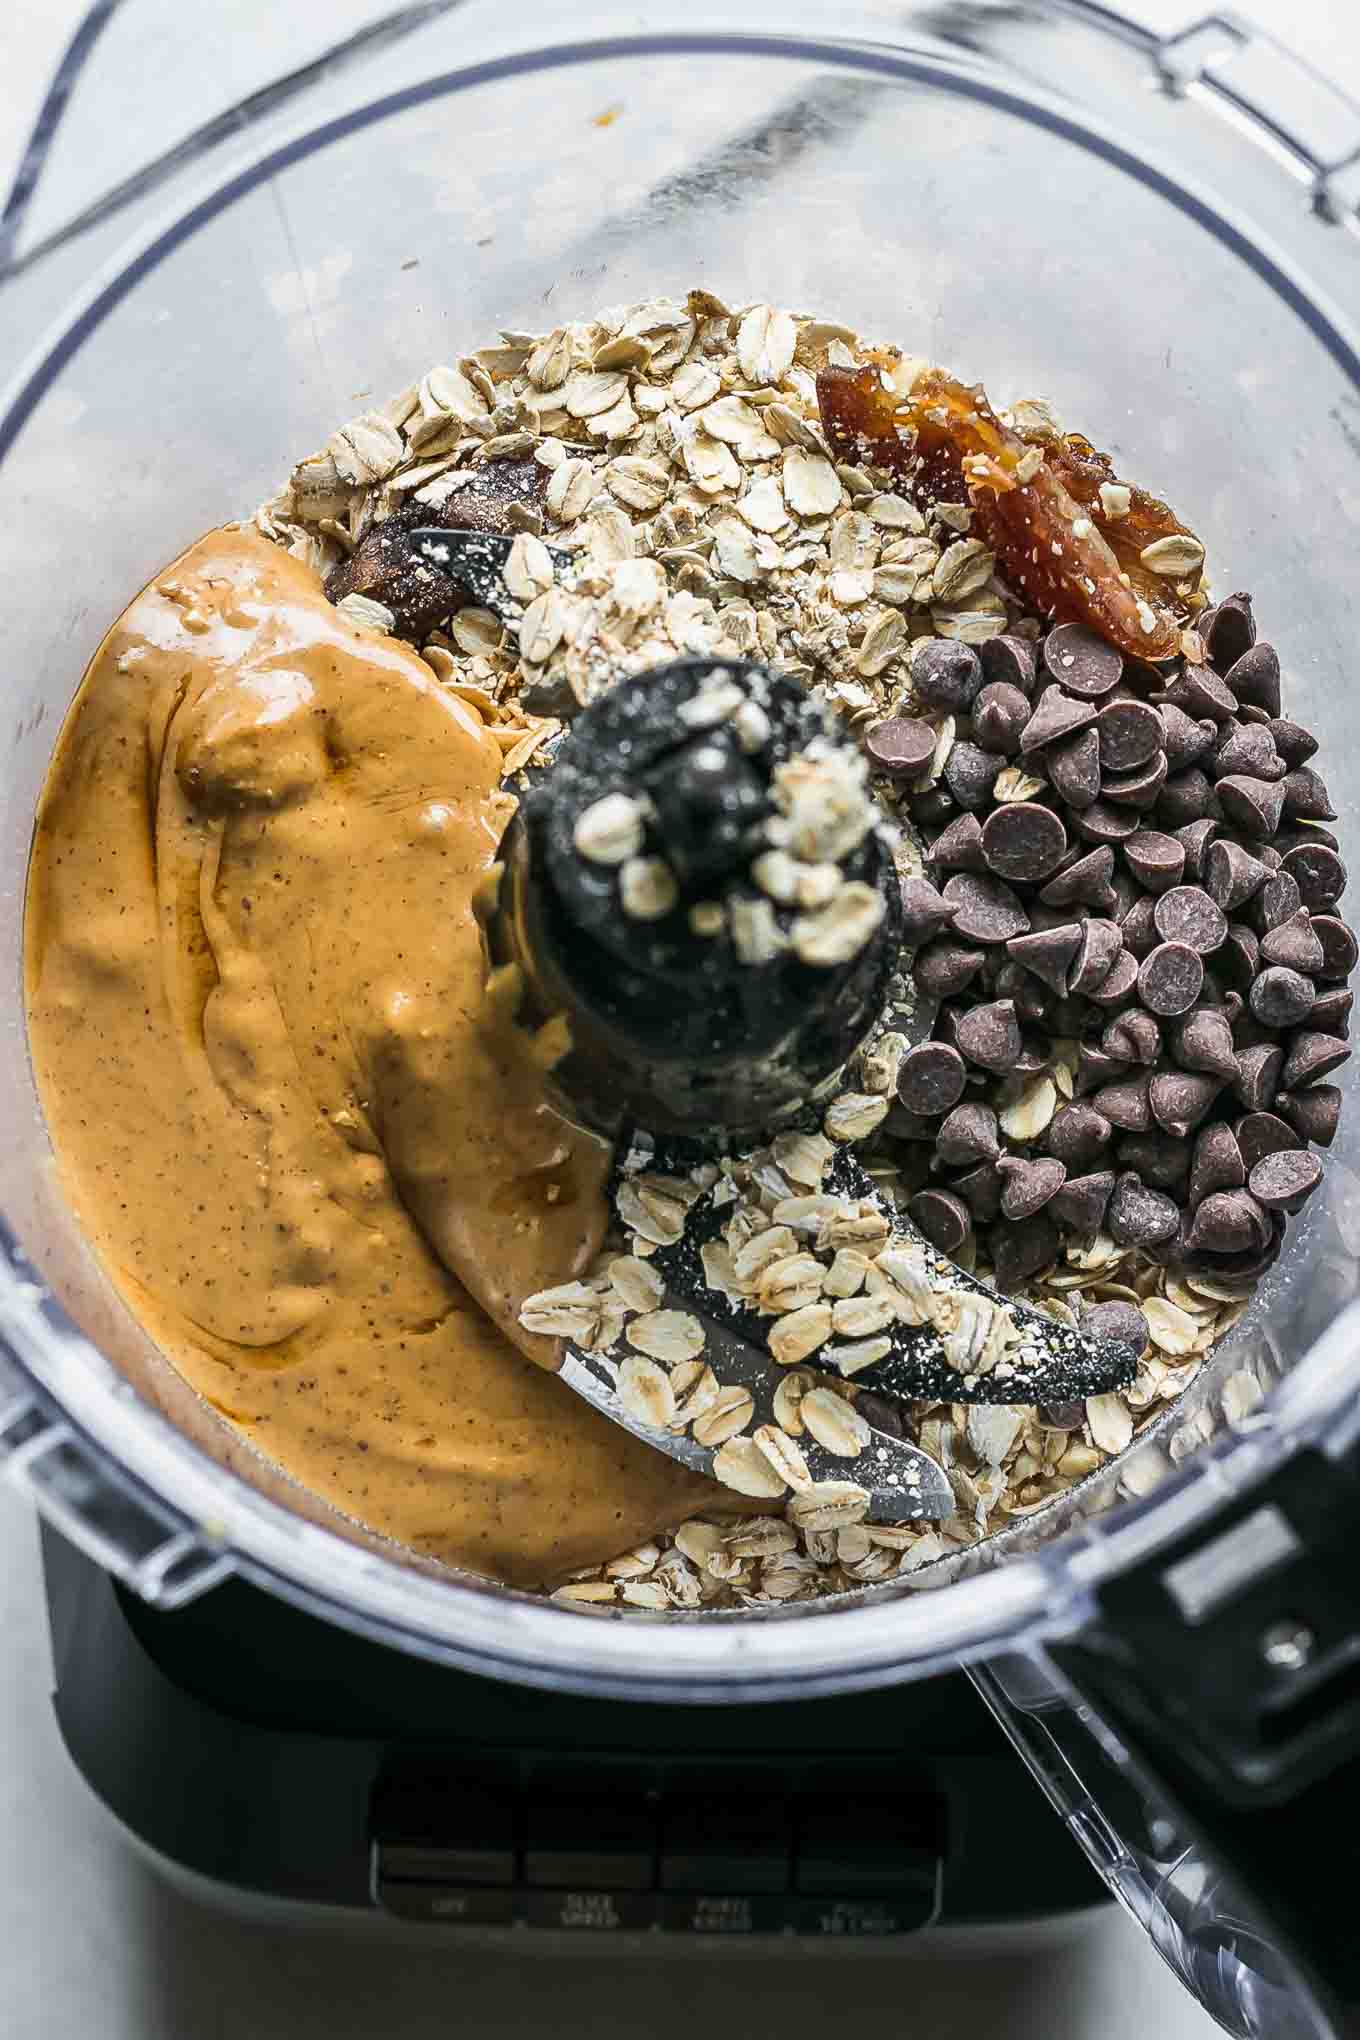 a food processor with oats, dates, chocolate chips, peanuts, and peanut butter inside